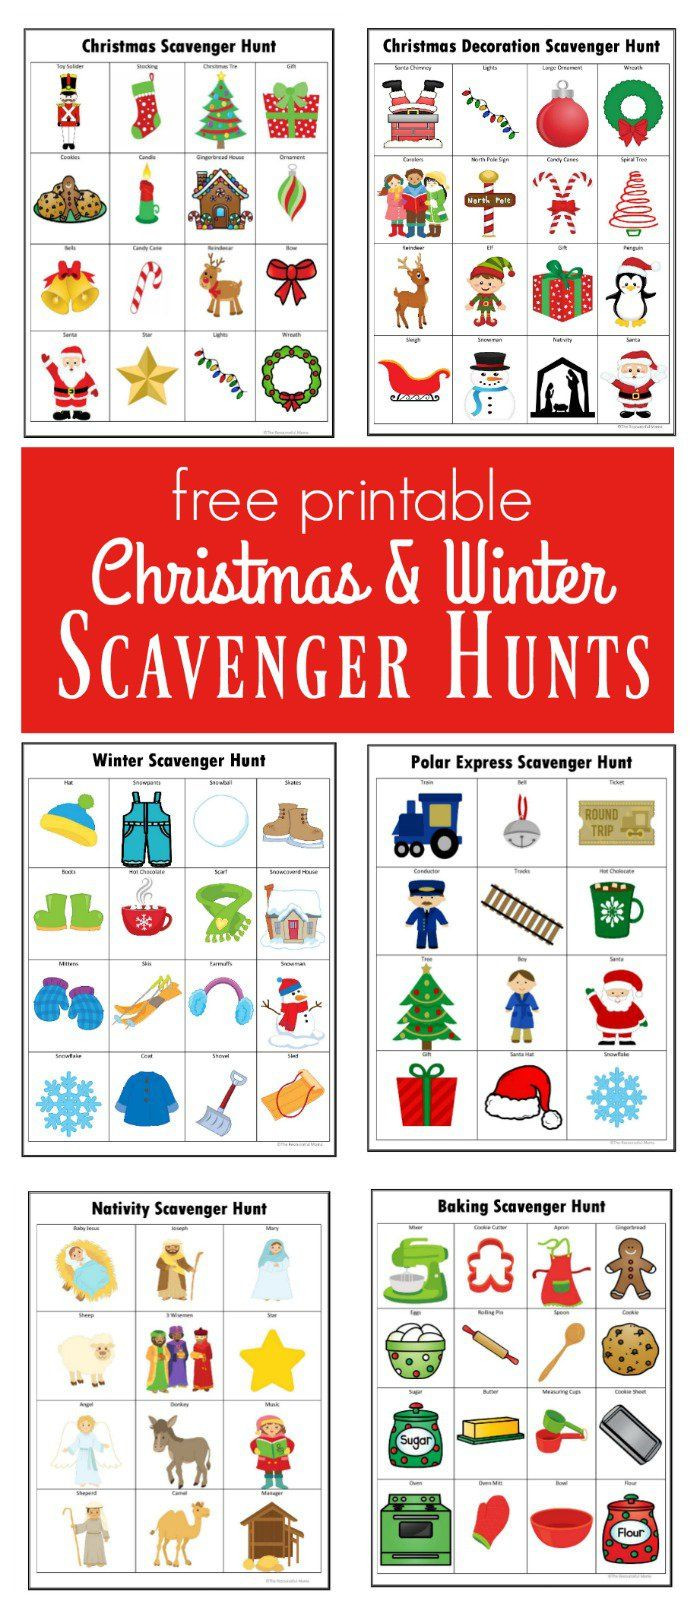 Christmas Party Scavenger Hunt Ideas
 The 25 best Christmas scavenger hunt ideas on Pinterest